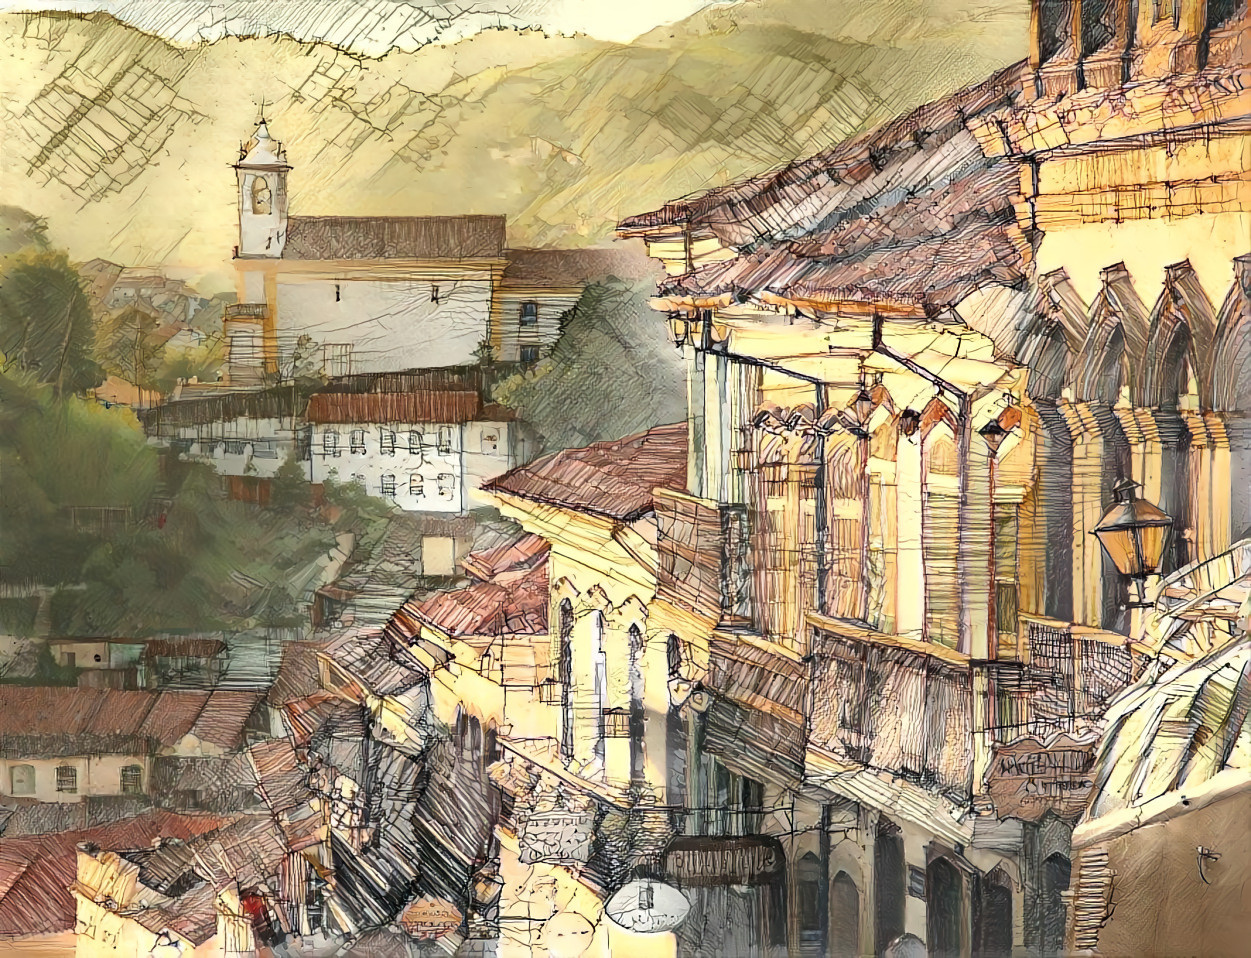 Sketch of Ouro Preto (Brazil) - Credits to the talented artist Asgarip (@architectdrw) for the style